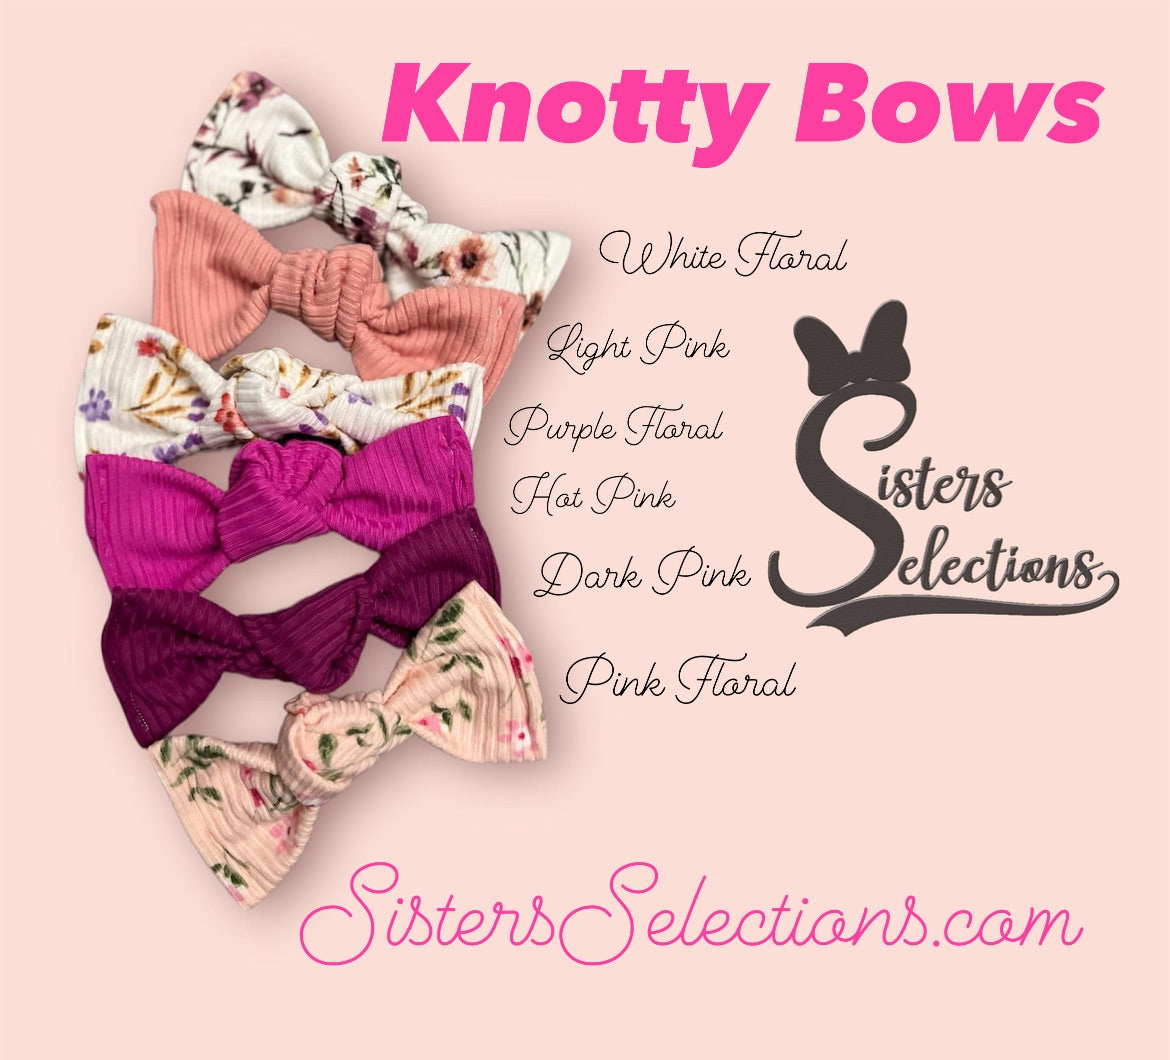 Knotty Bows SHIPS in 7-10 business days